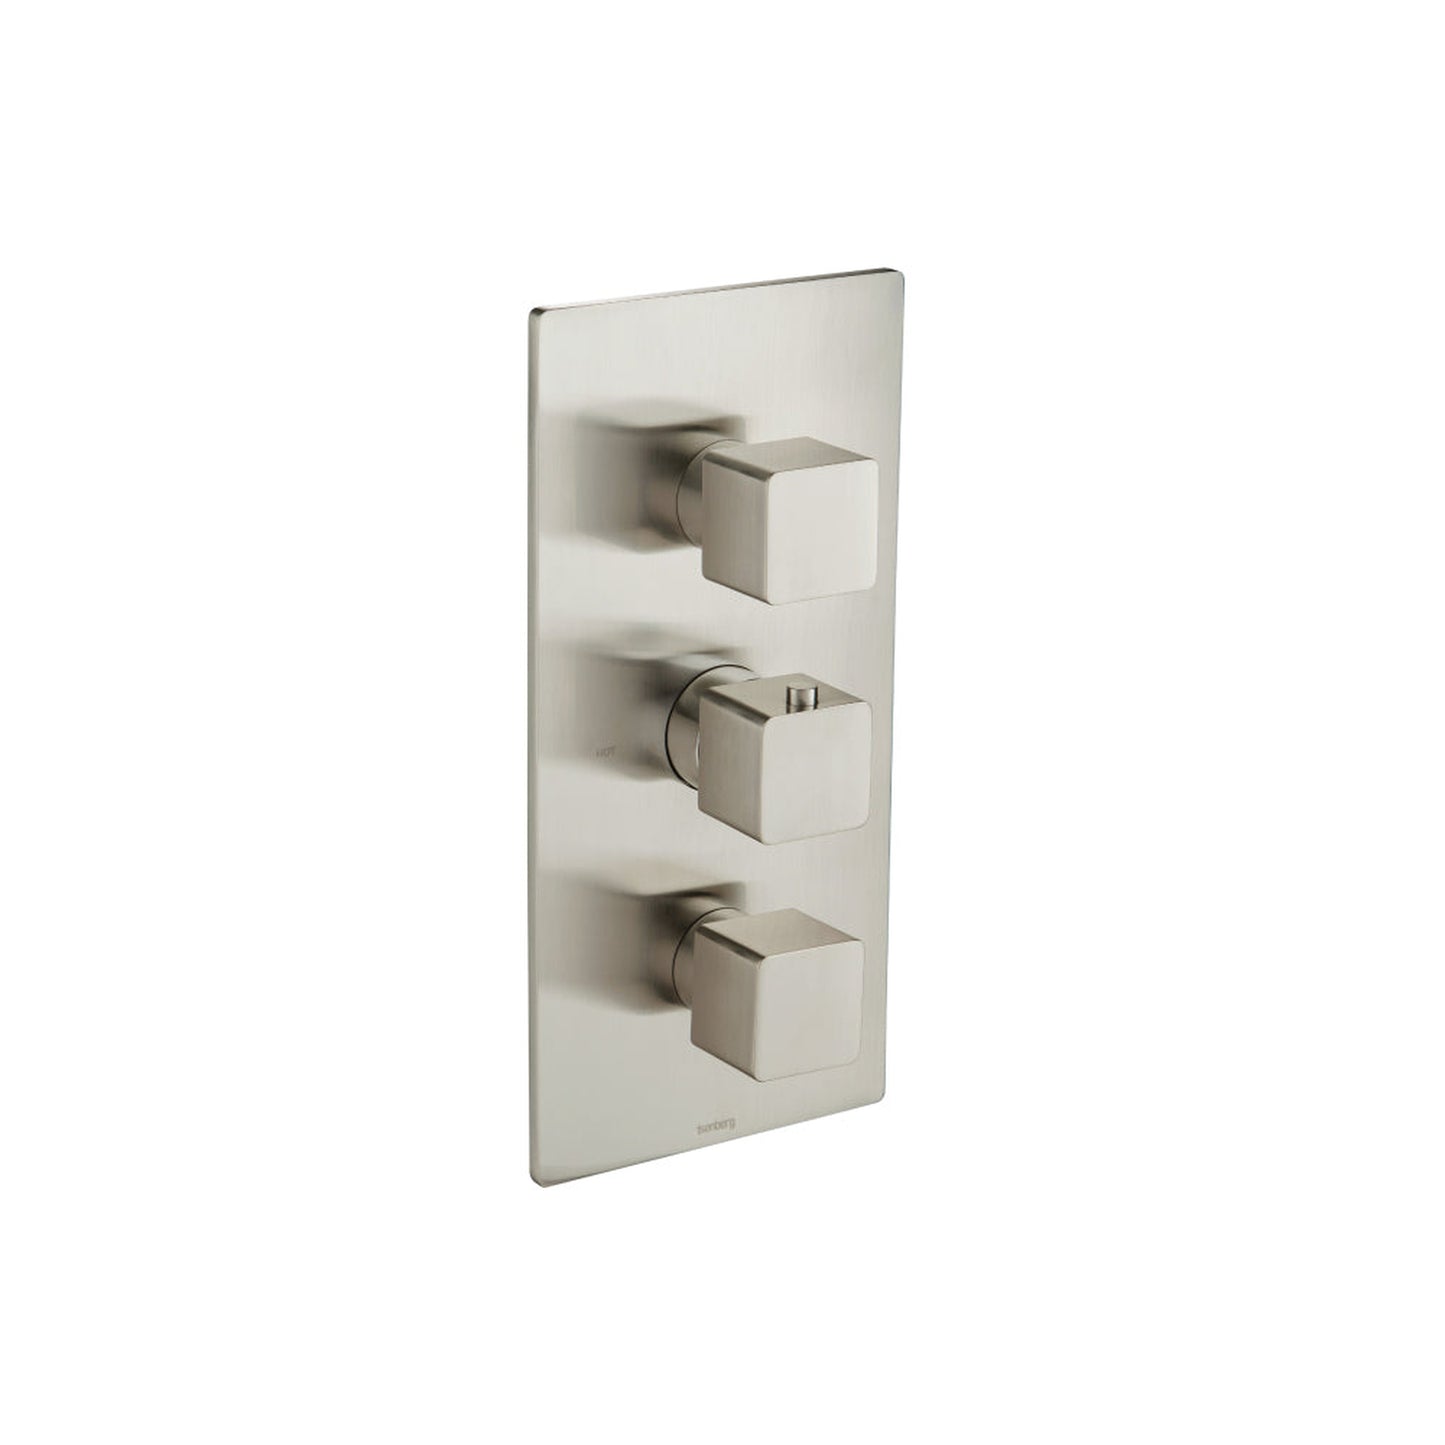 Isenberg Serie 196 Trim for Thermostatic Valve in Brushed Nickel (196.4500TBN)